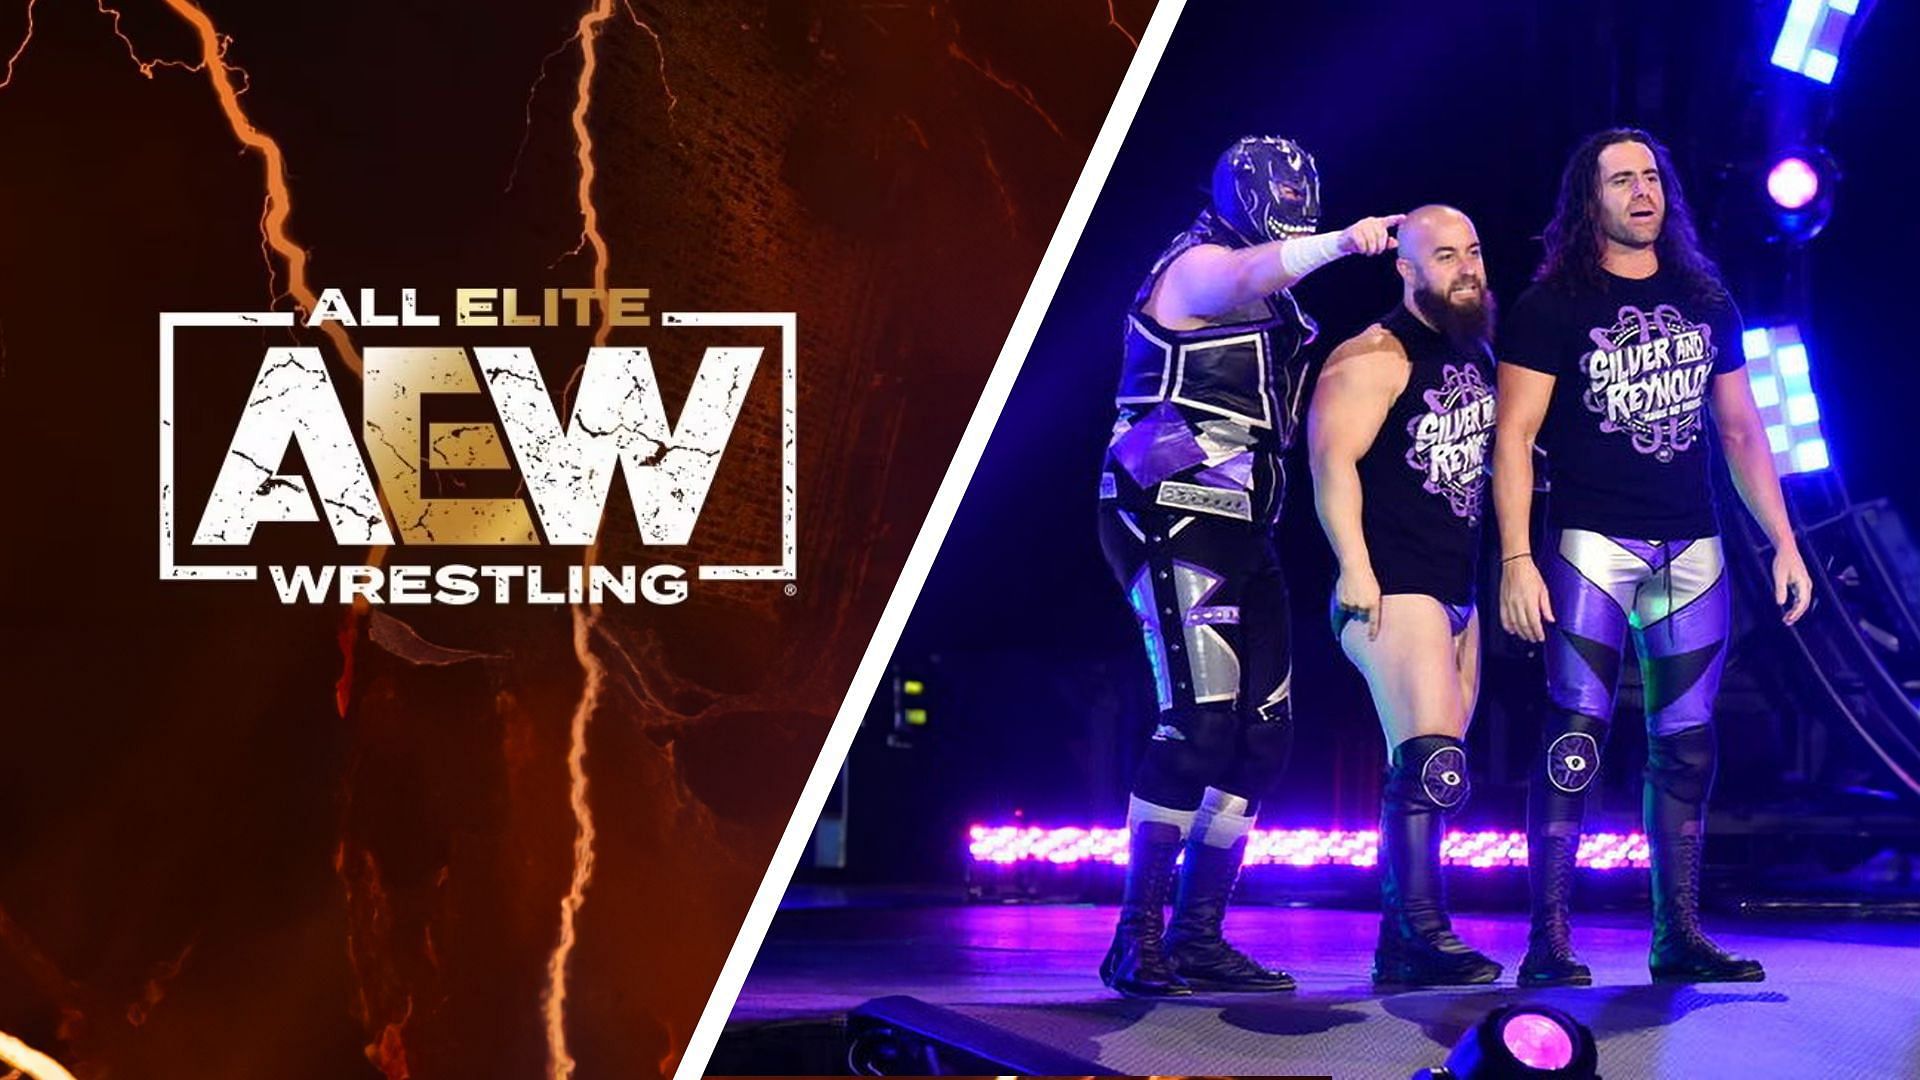 The Dark Order is still going strong in AEW